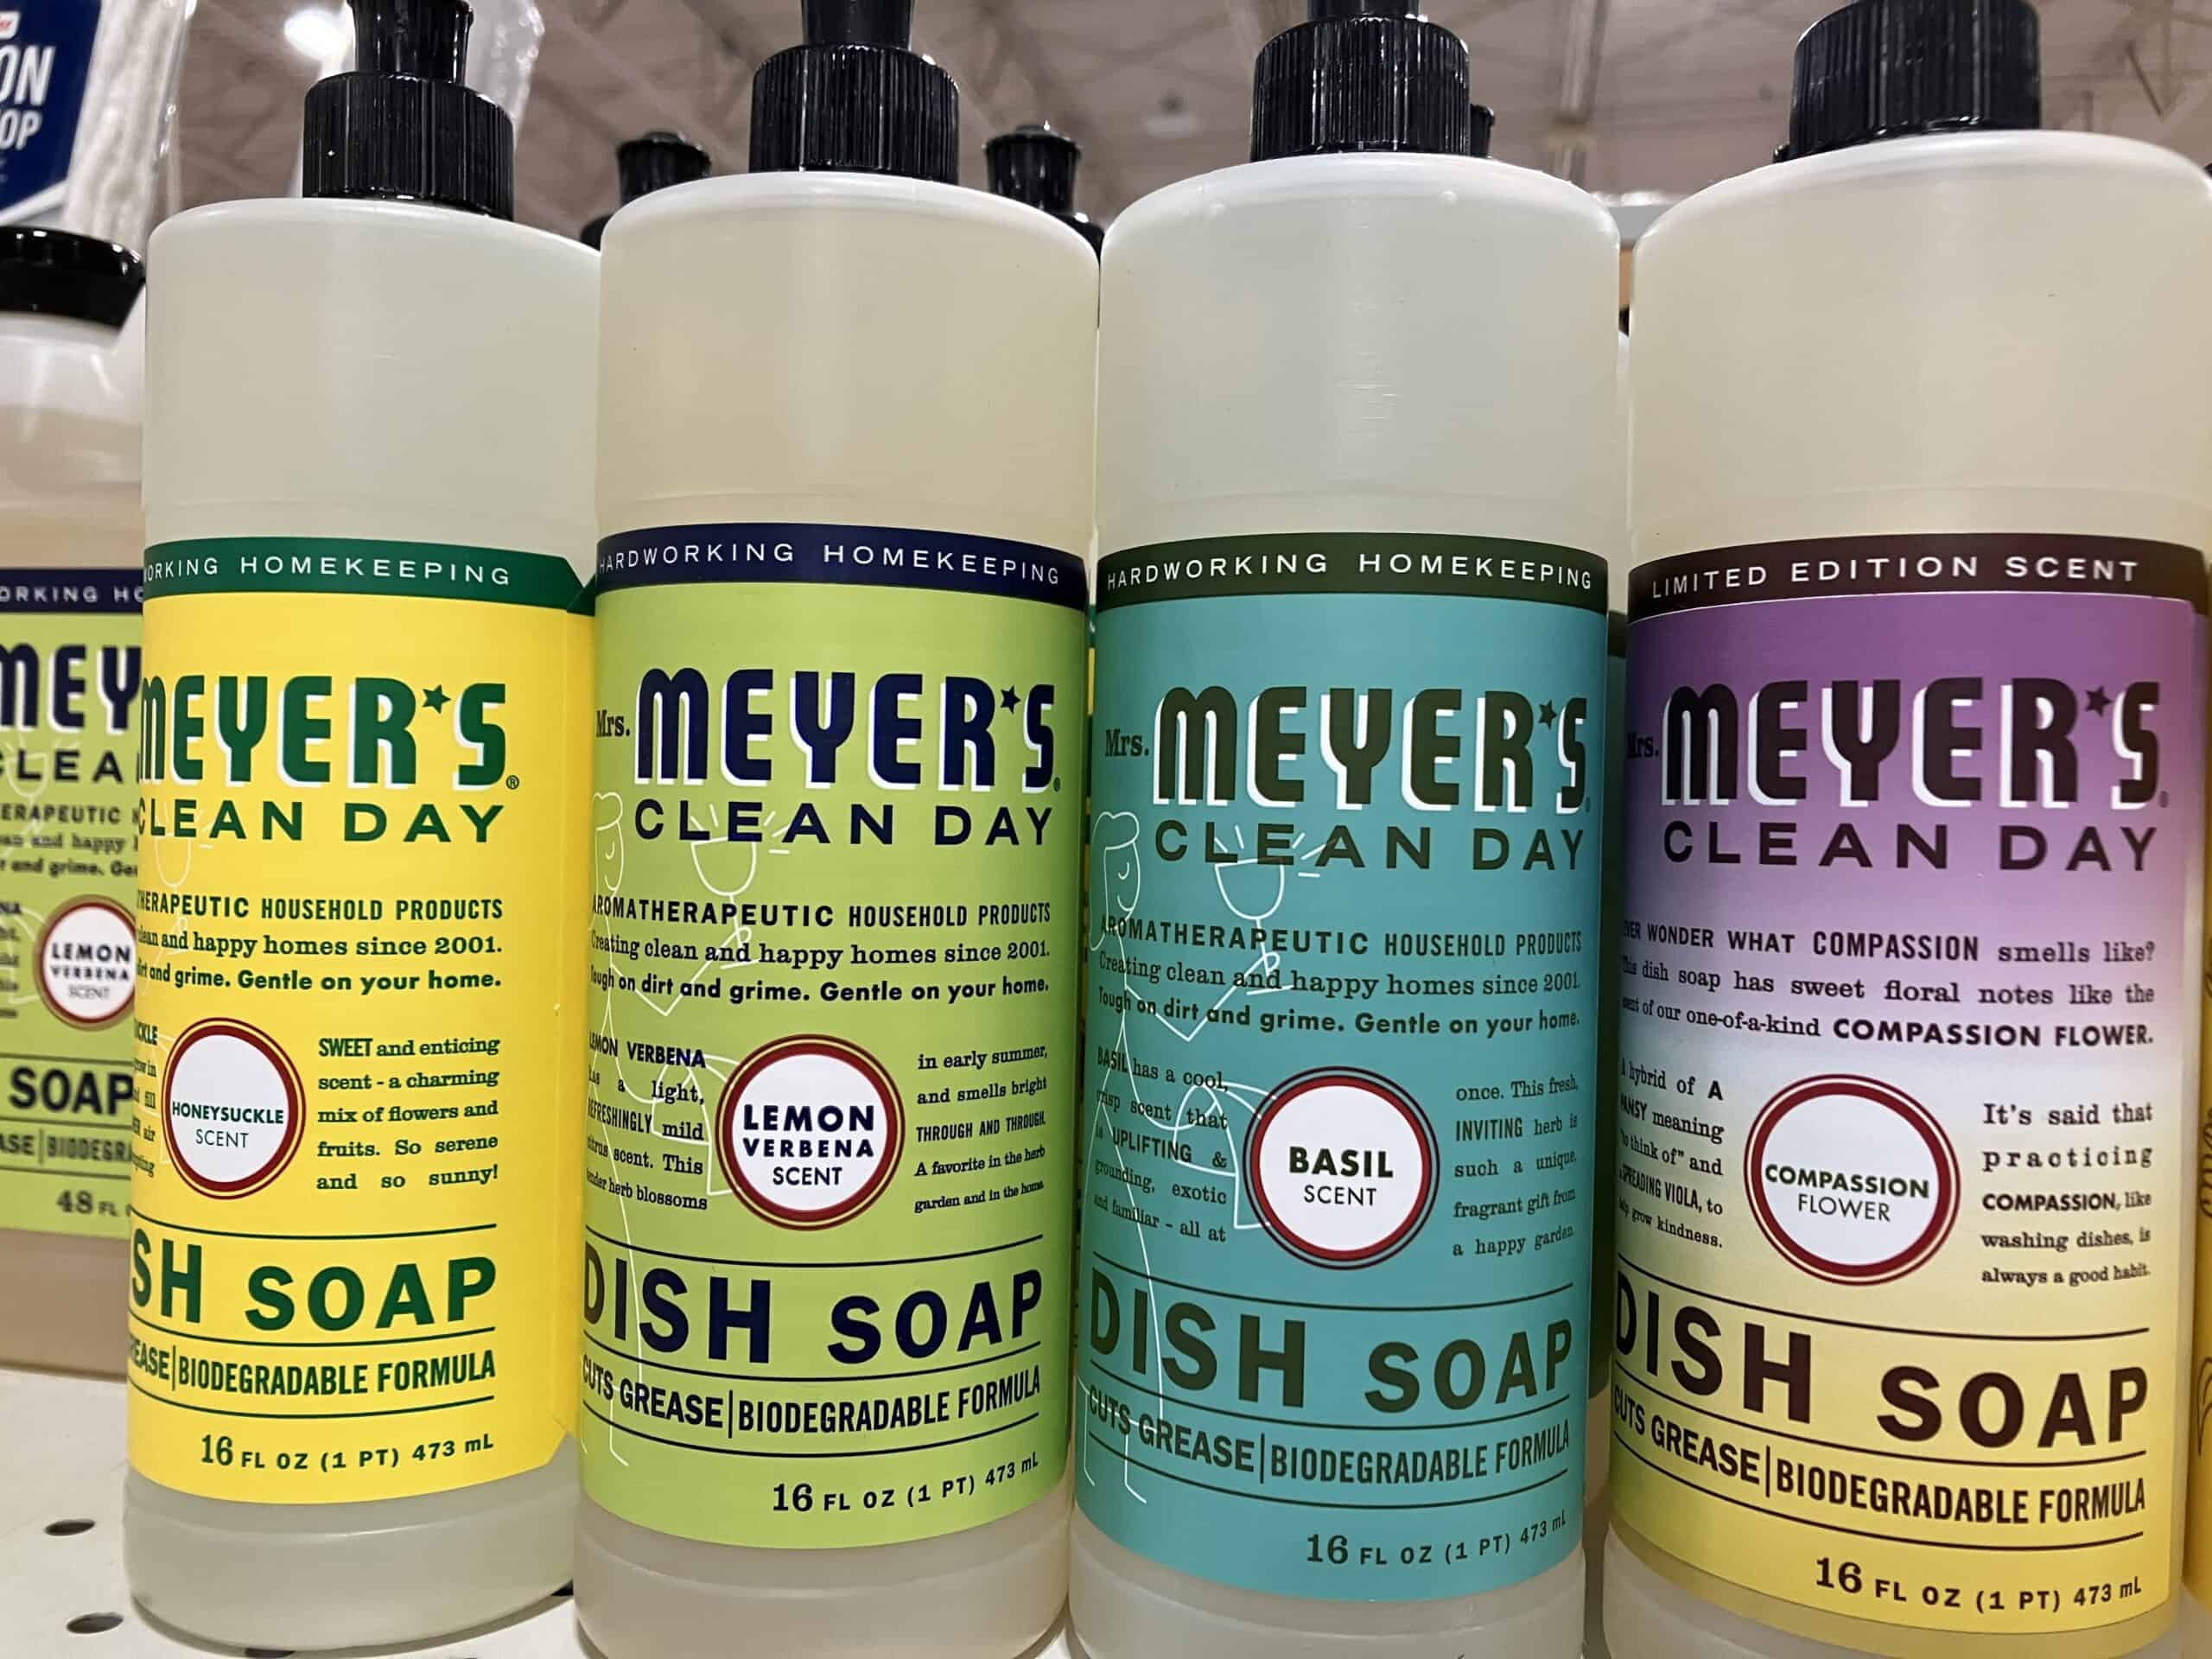 Mrs. Meyer's Clean Day dish soap